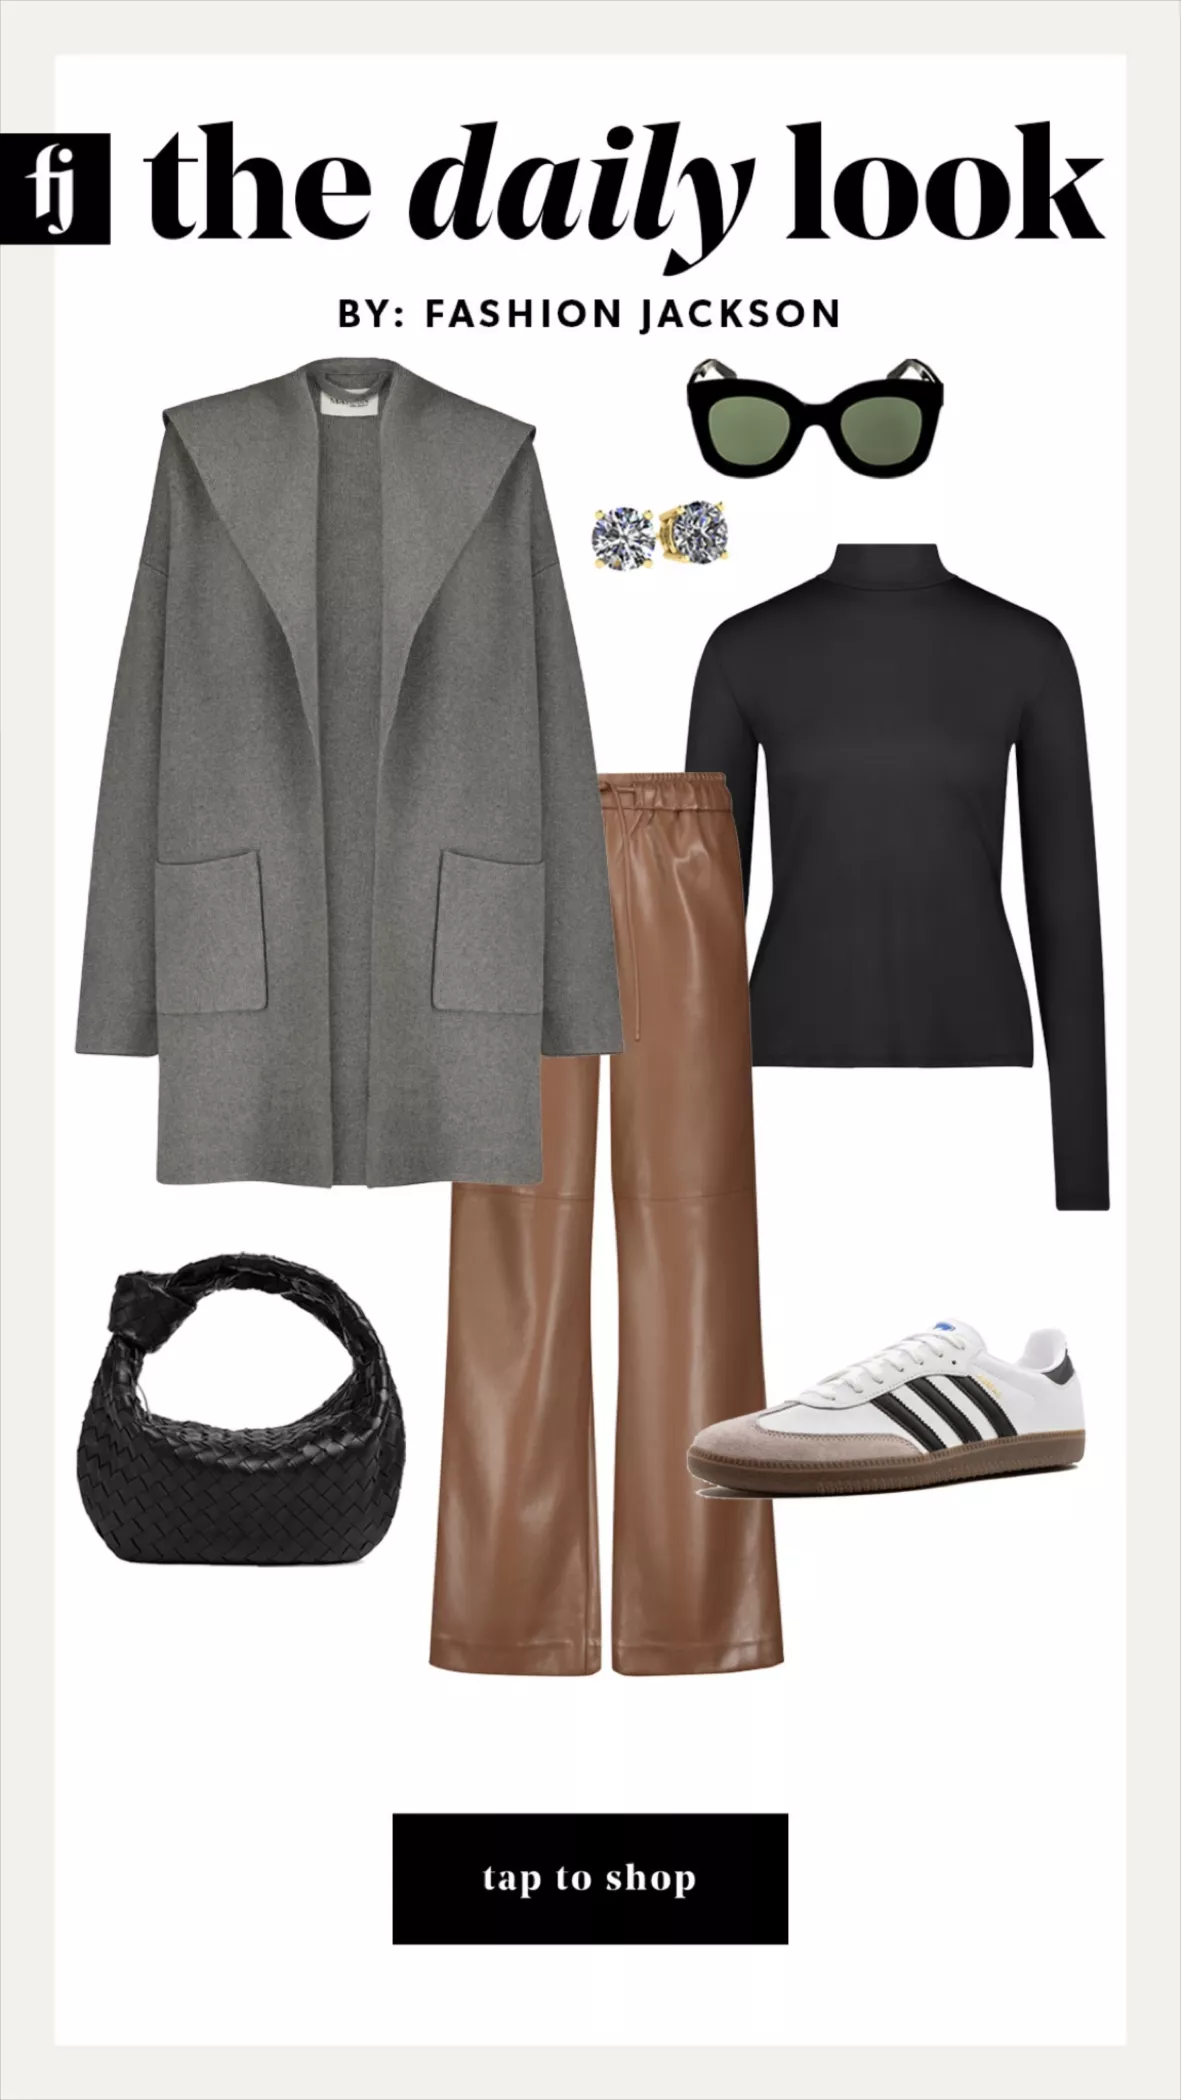 12 Outfit Ideas to Look Chic at the Office - Fashion Jackson